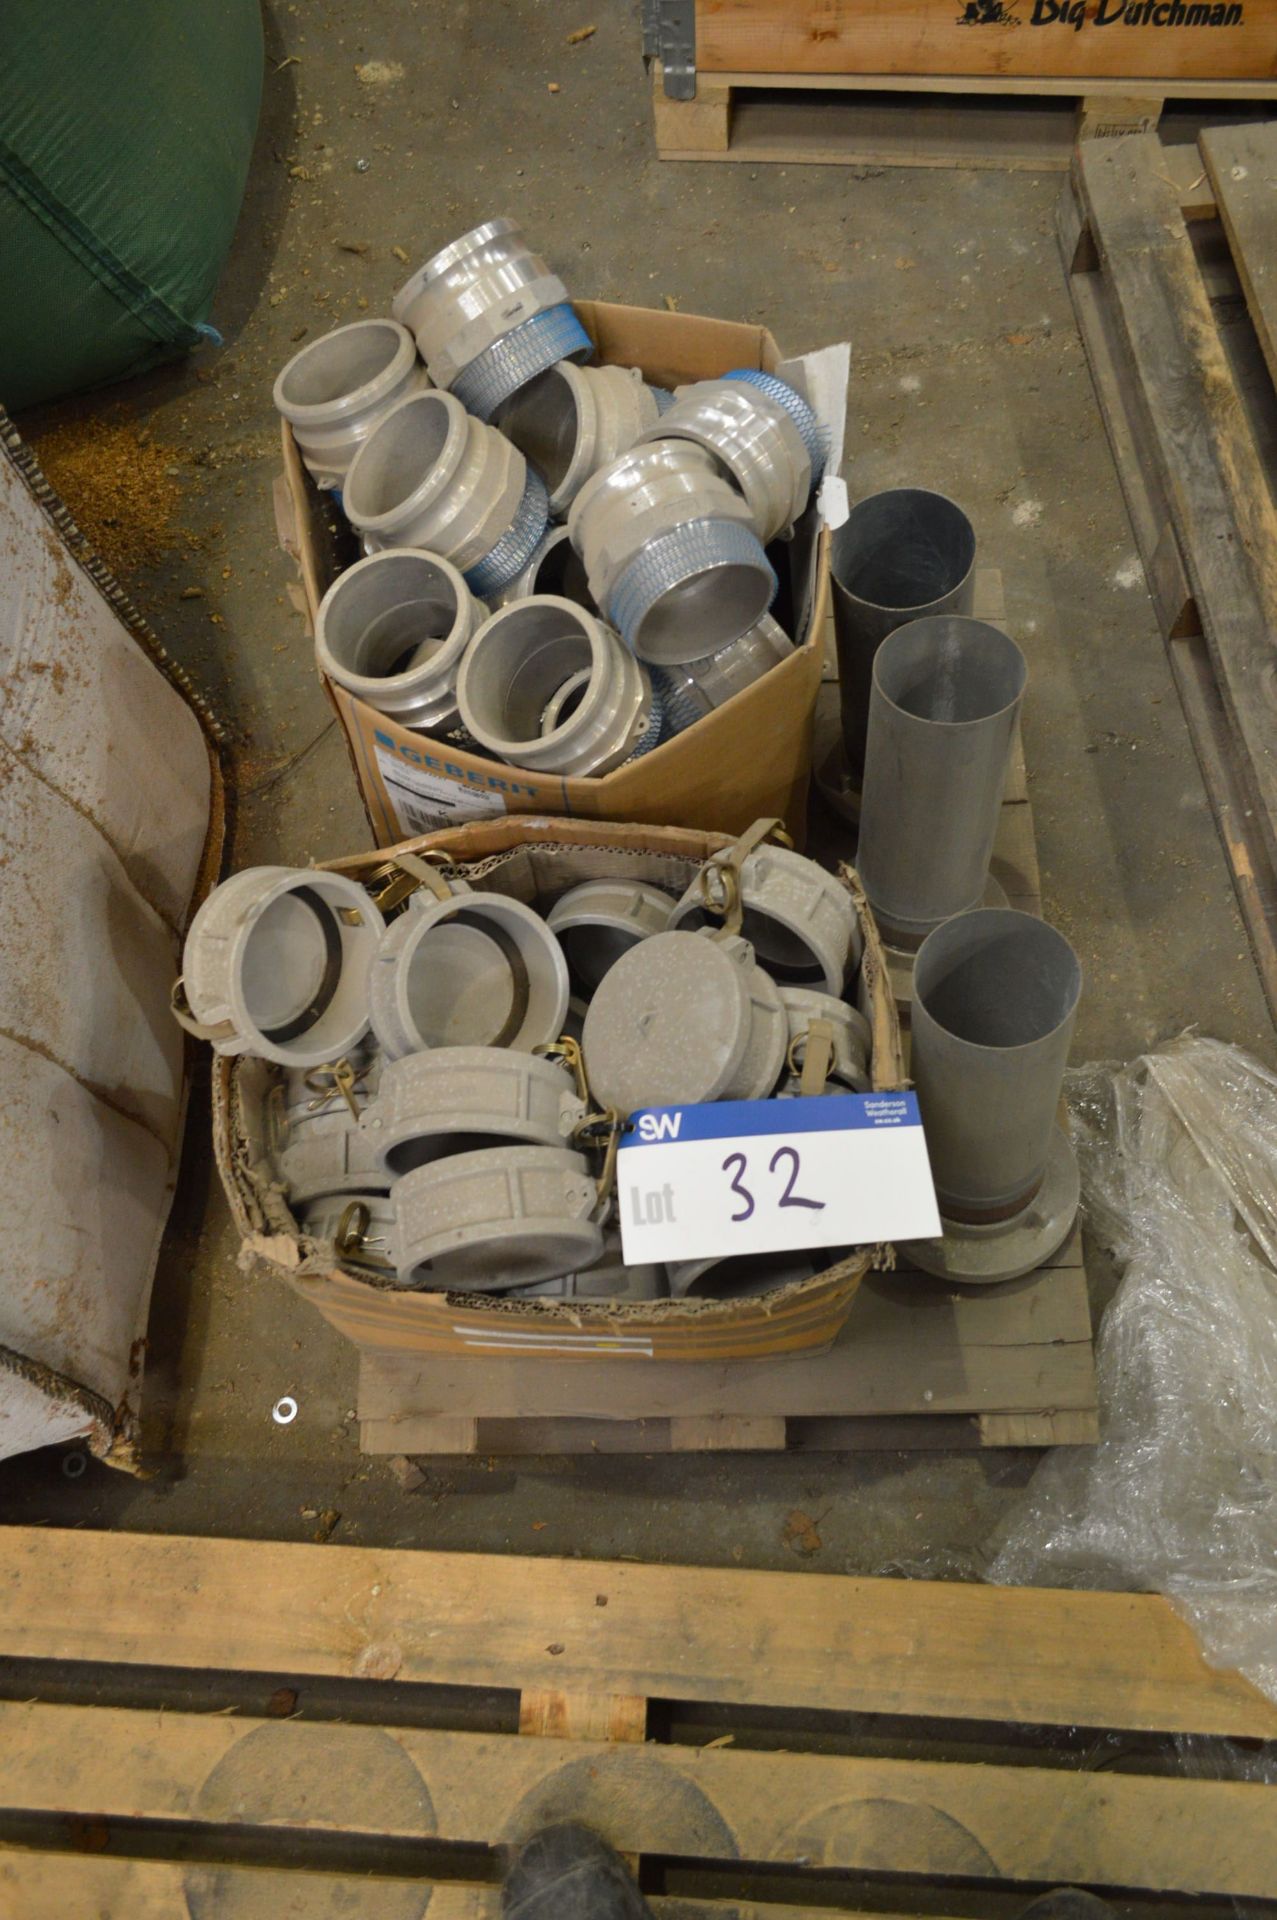 Assorting Pipe Couplings, on one pallet